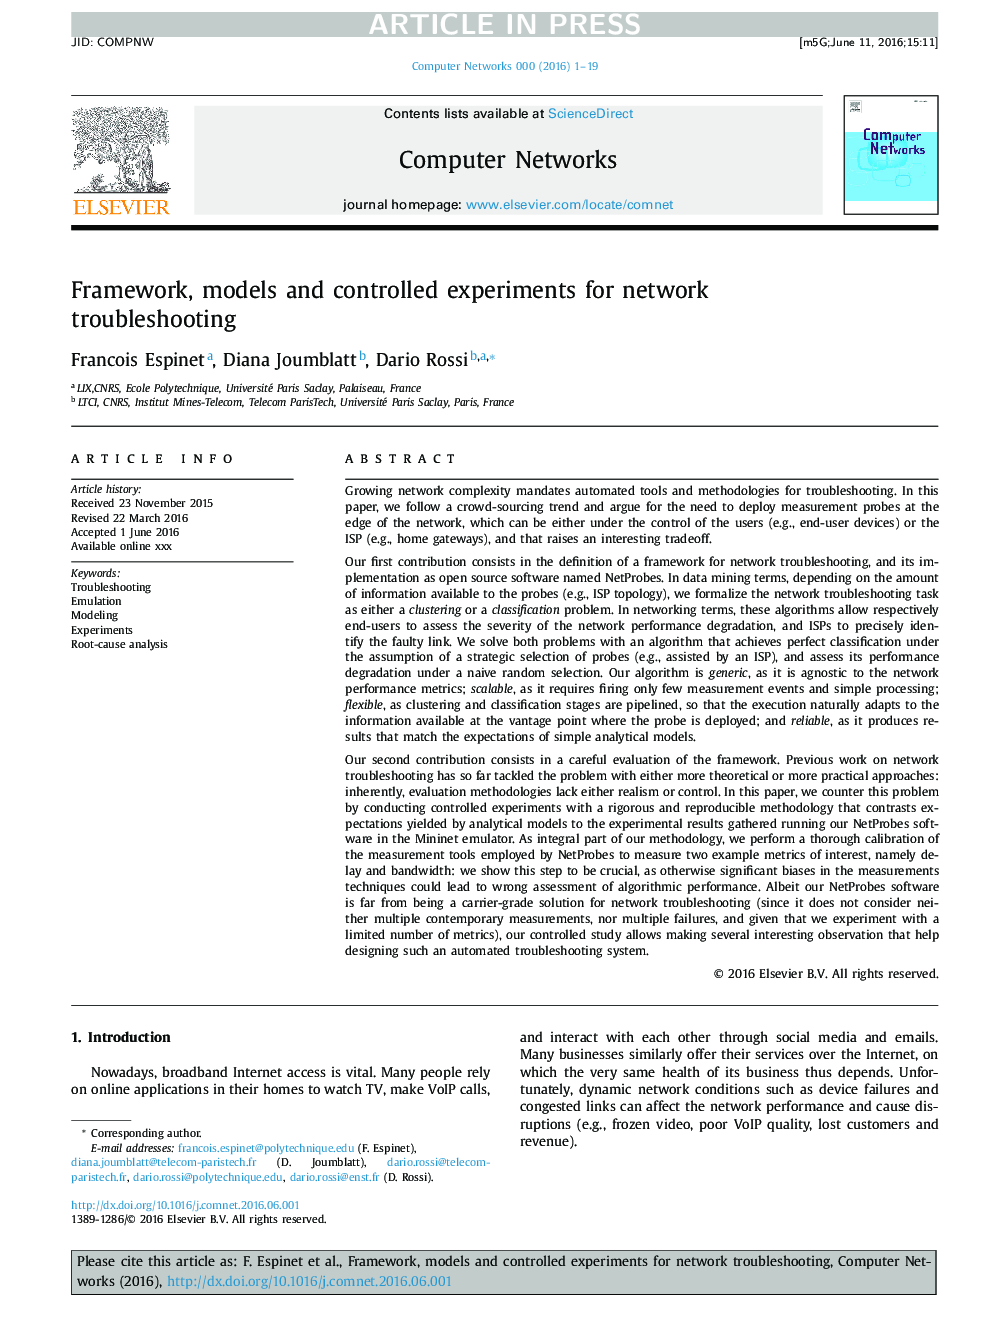 Framework, models and controlled experiments for network troubleshooting